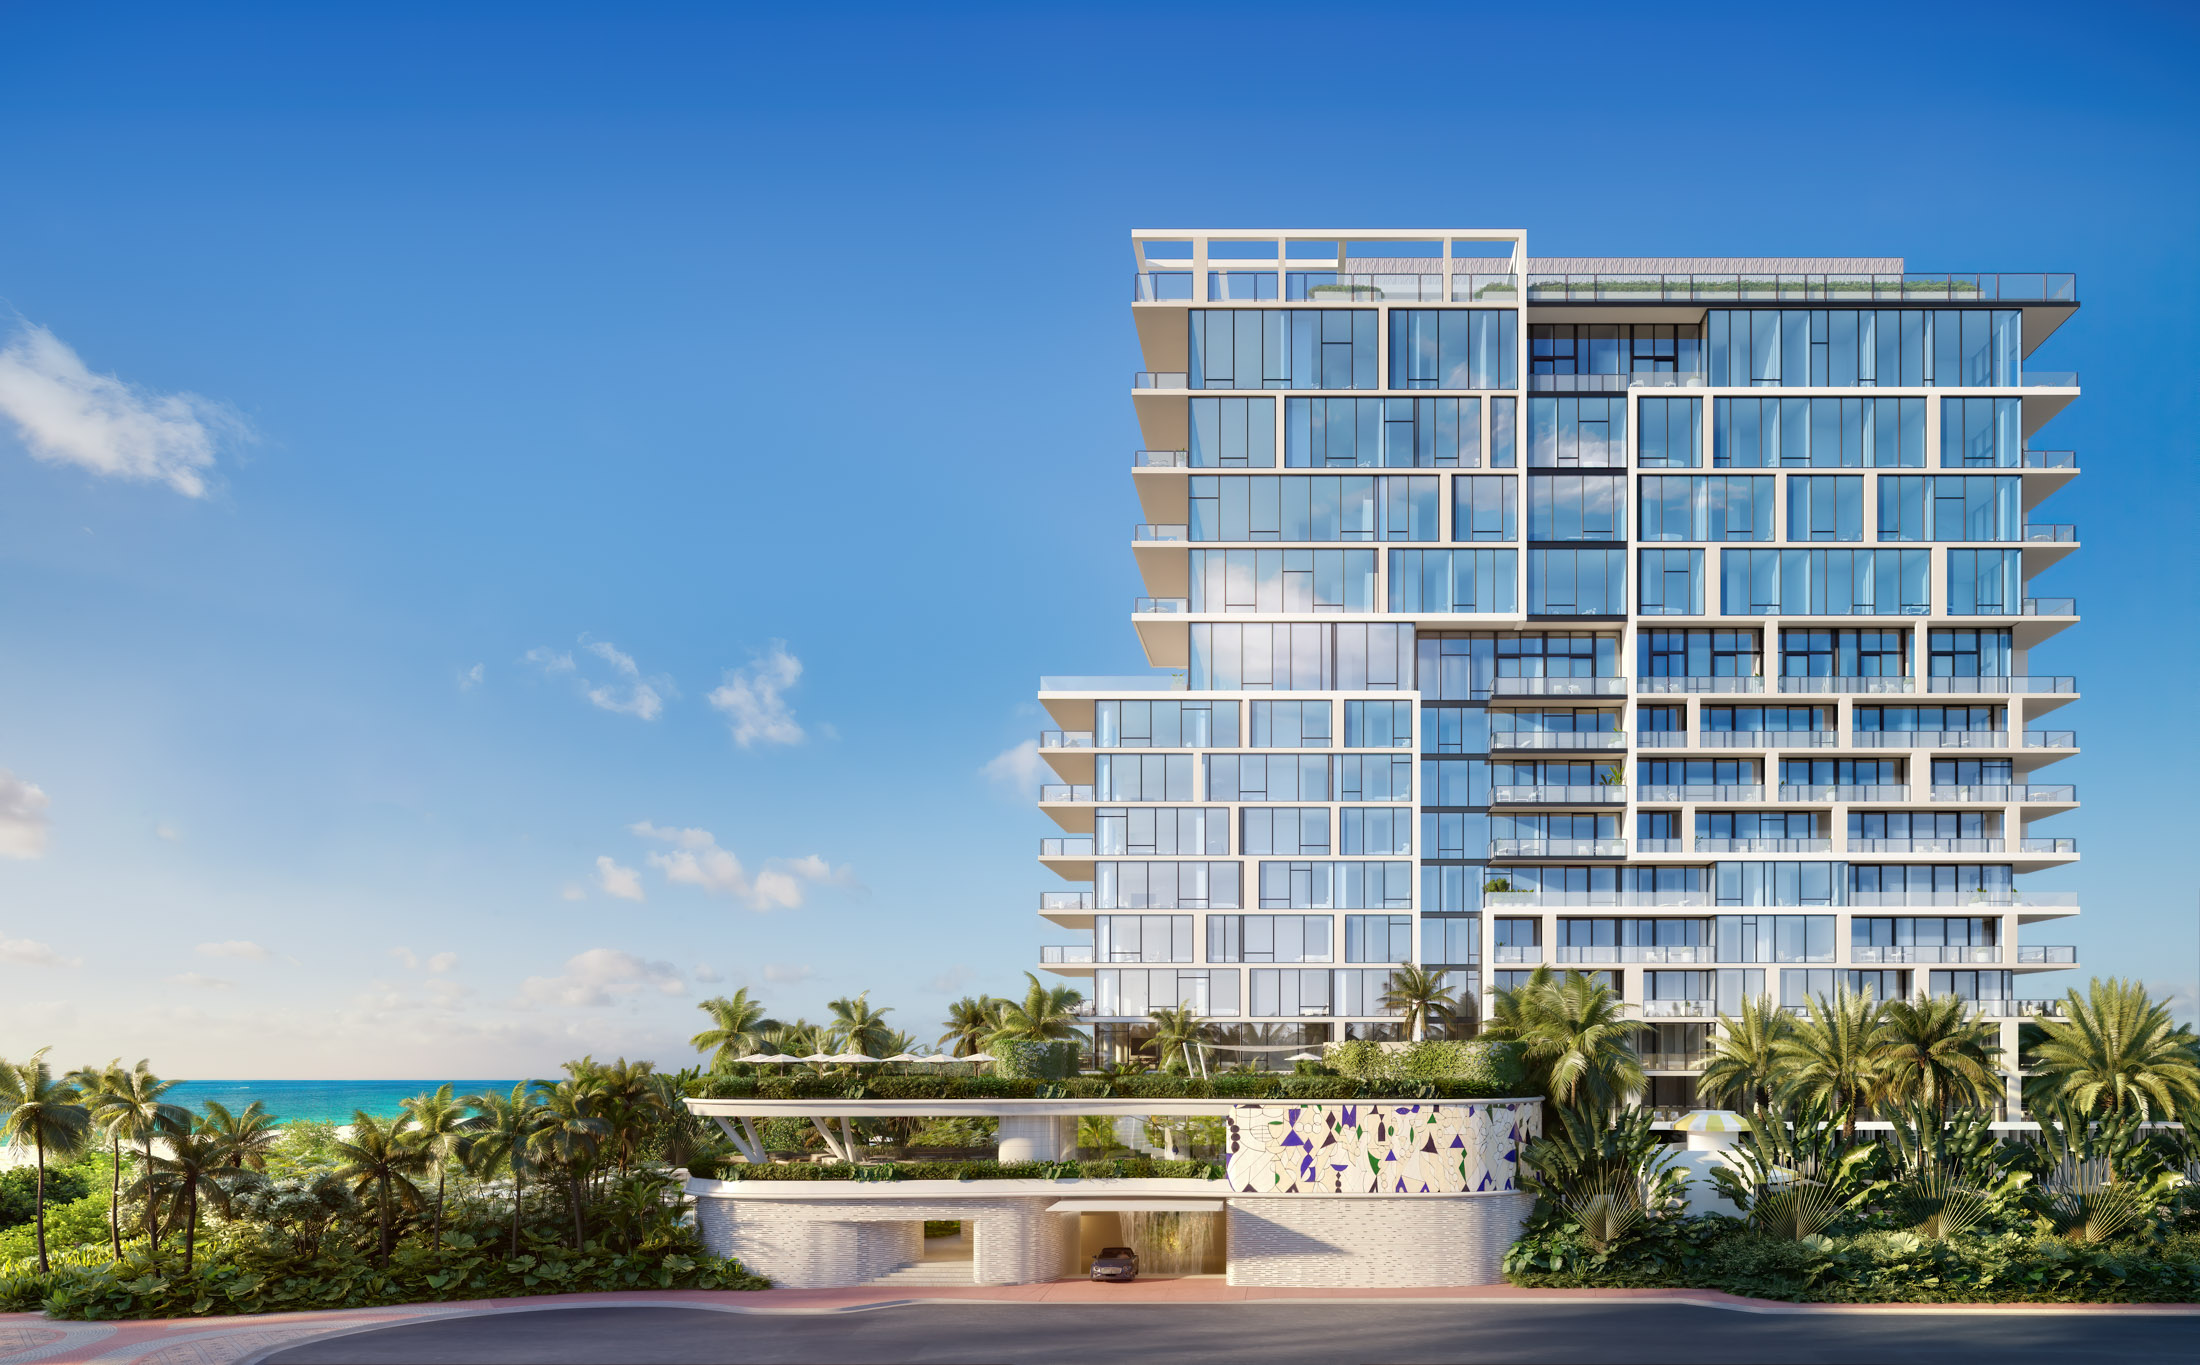 The forthcoming residential tower and beach club at the Raleigh.